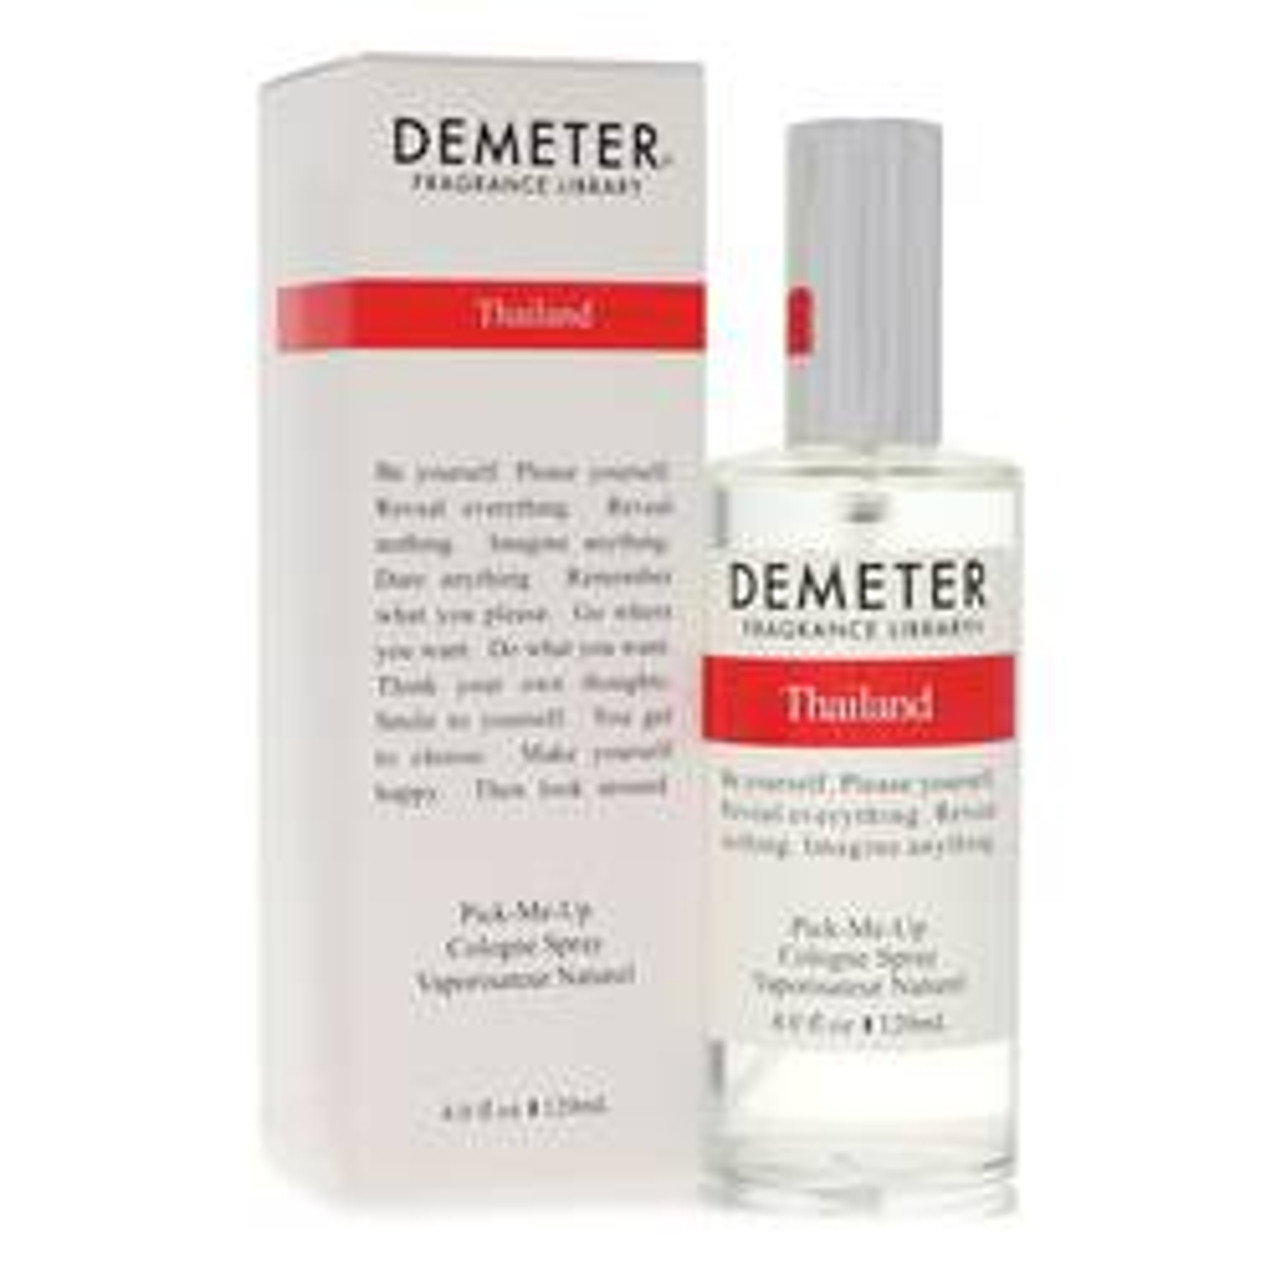 Demeter Thailand Perfume By Demeter Cologne Spray 4 oz for Women - [From 79.50 - Choose pk Qty ] - *Ships from Miami